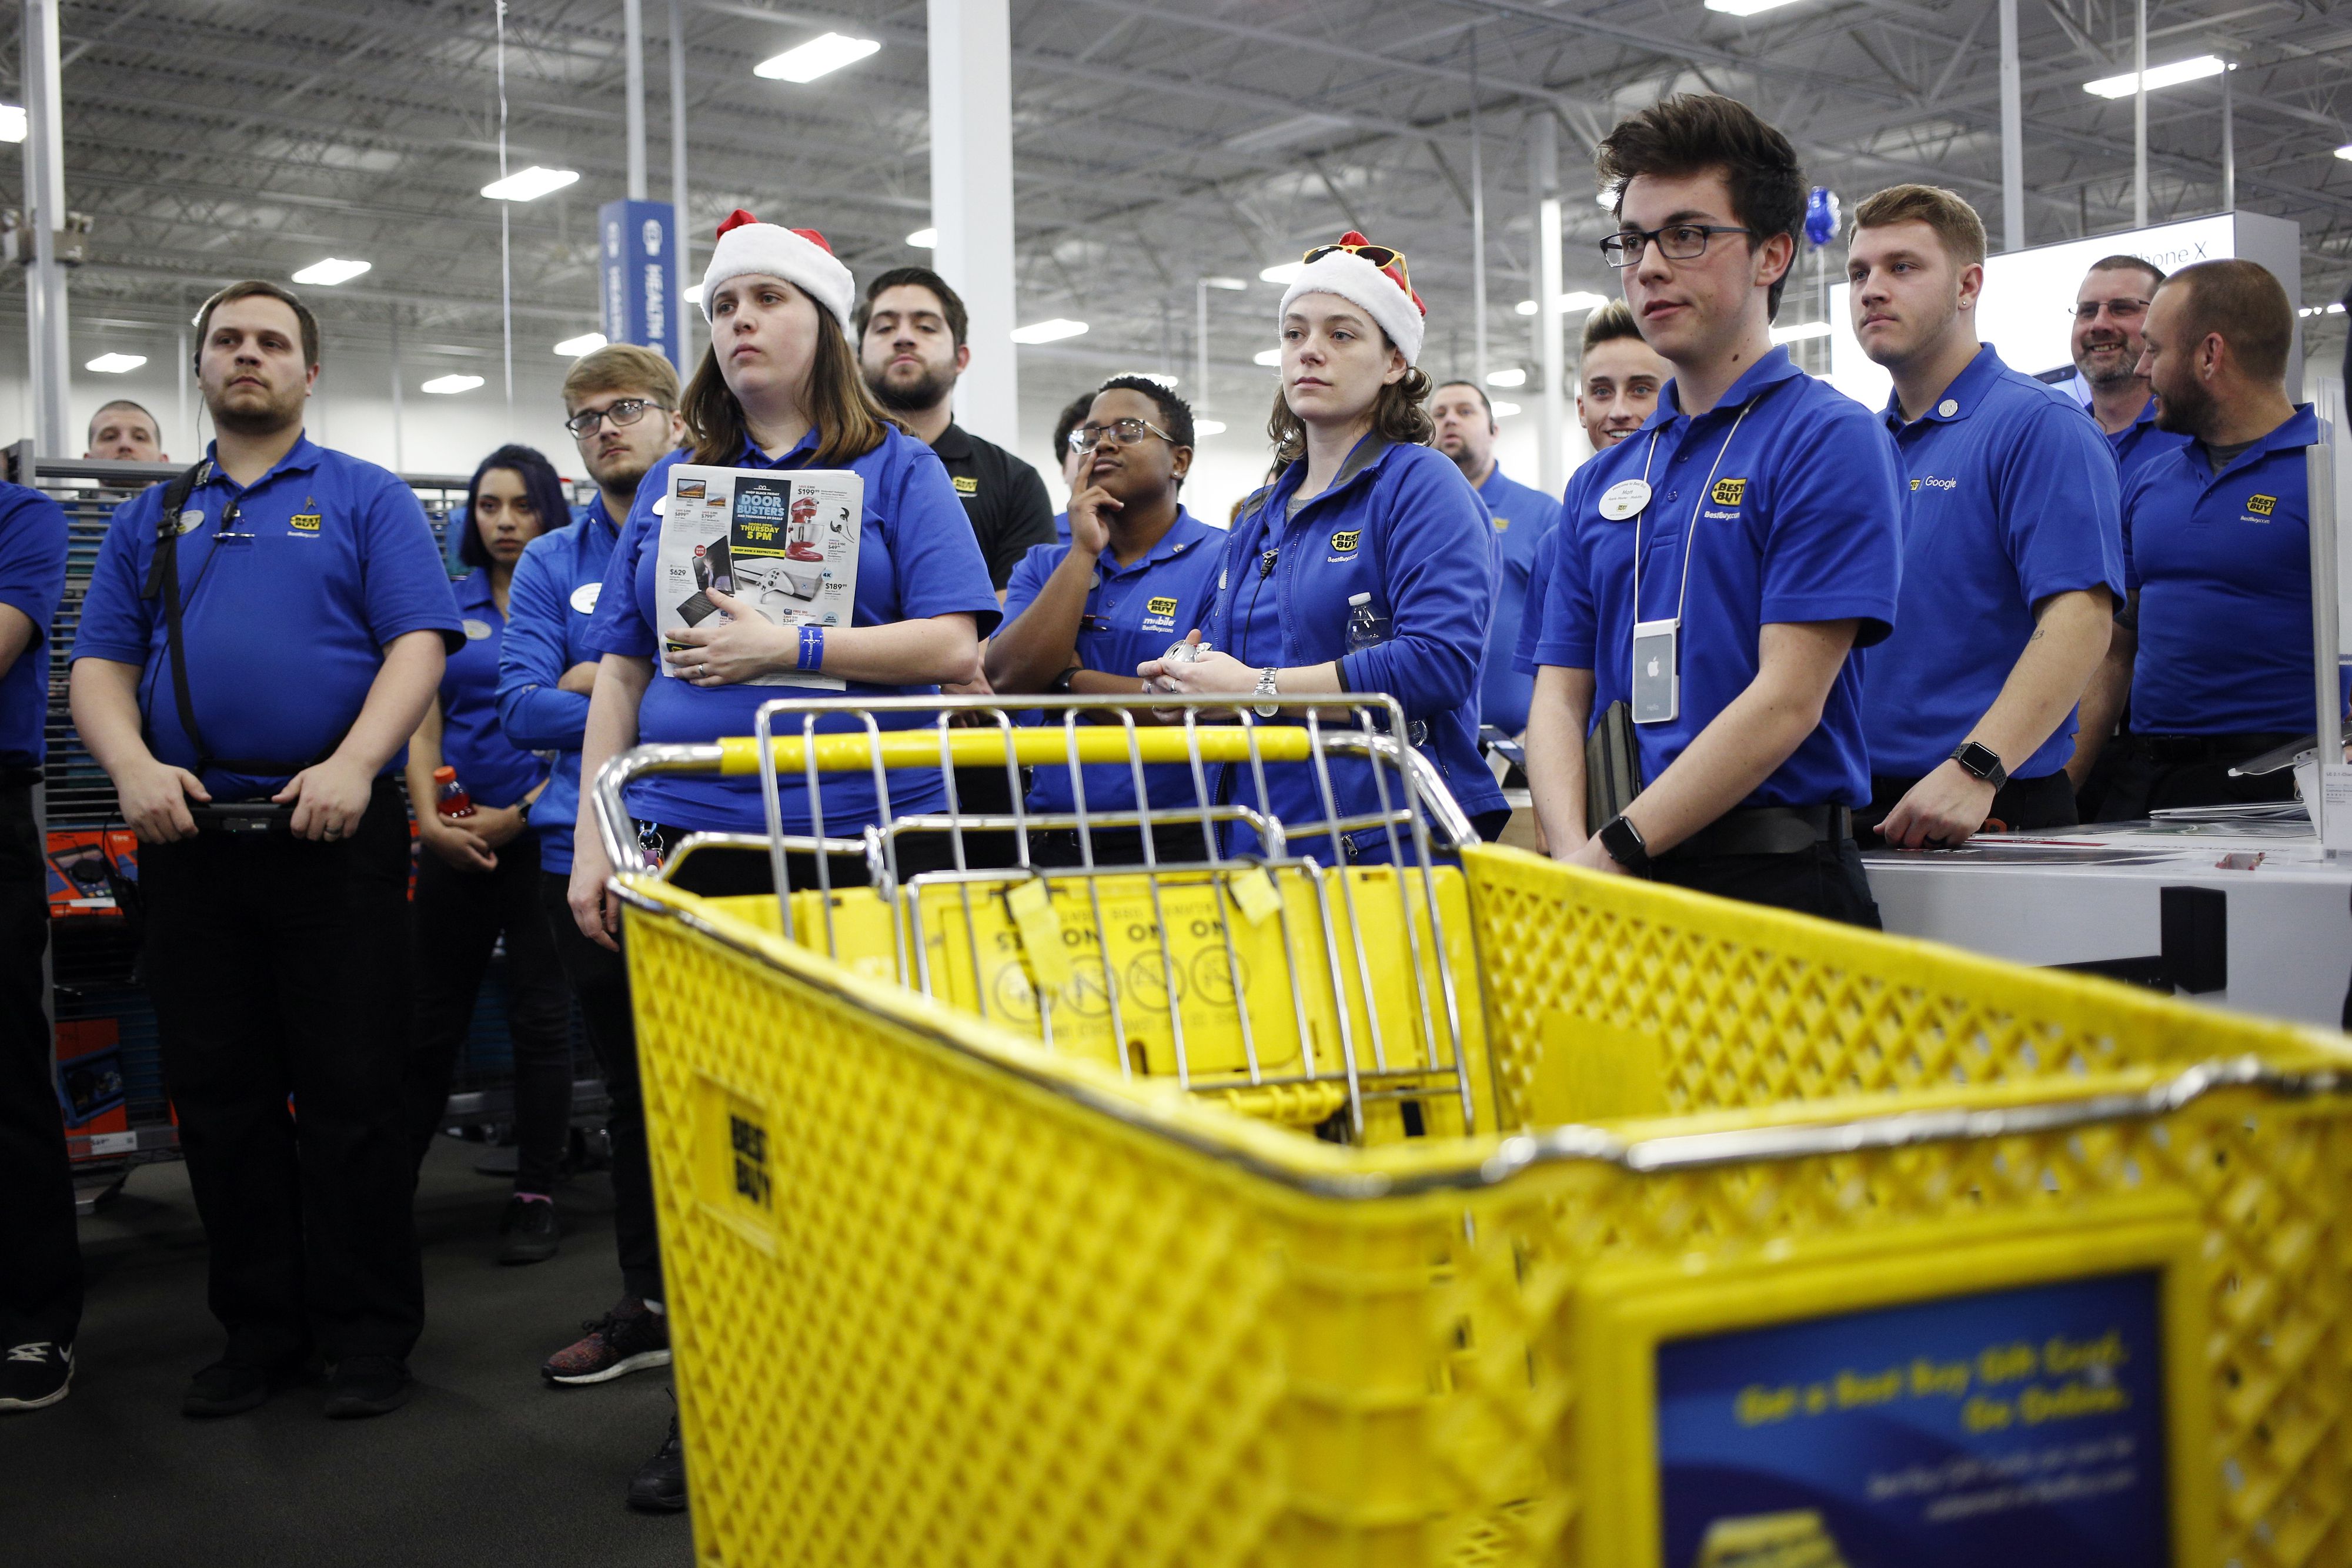 Employees gather for a meeting before opening the doors at a Best Buy store in Louisville, Ky., U.S., on Nov. 23, 2017. MUST CREDIT: Bloomberg photo by Luke Sharrett